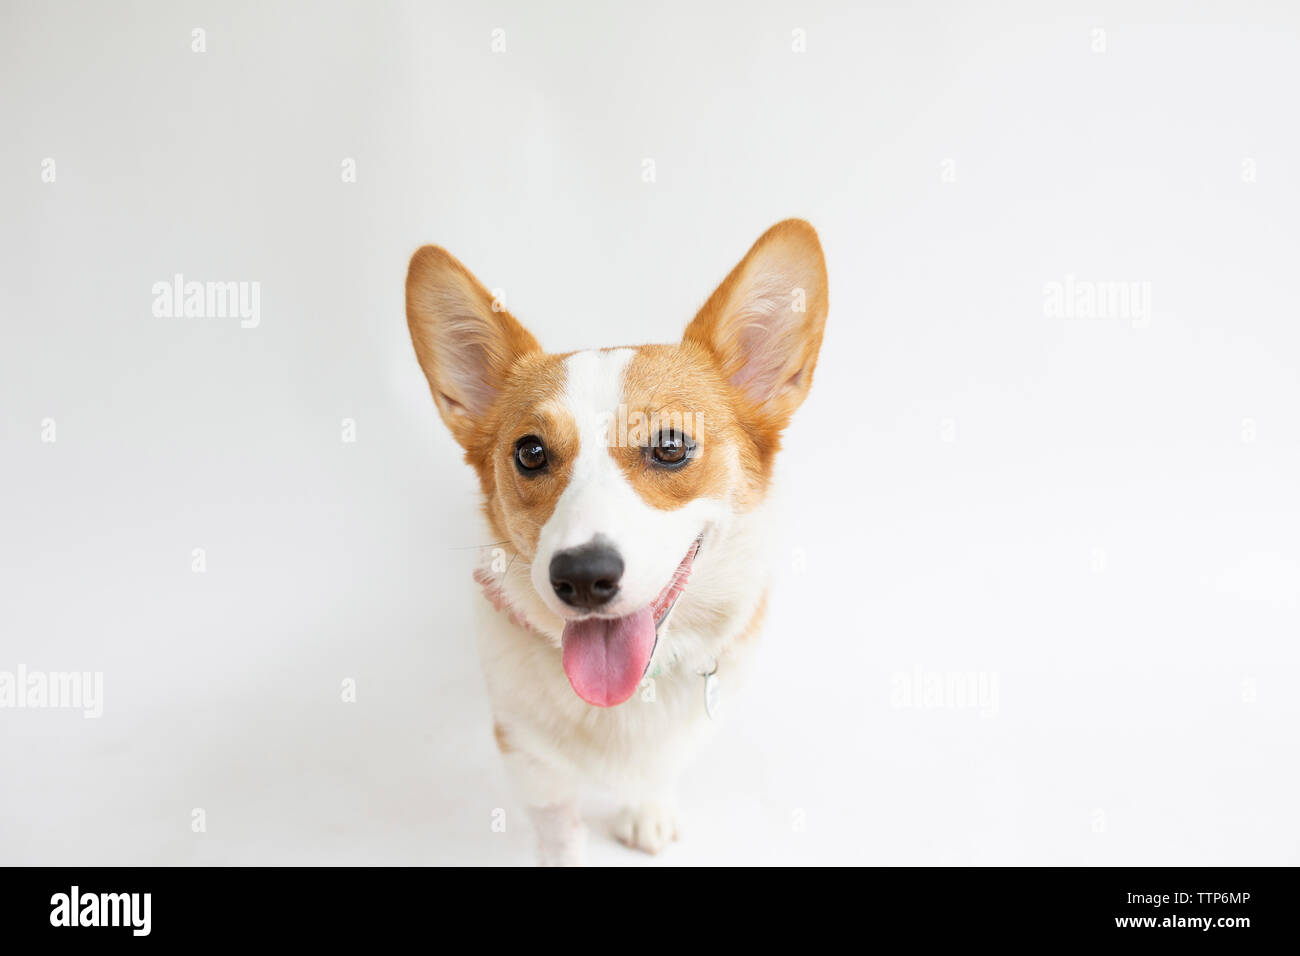 Close-up portrait of corgi sticking out tongue while standing against white background Stock Photo